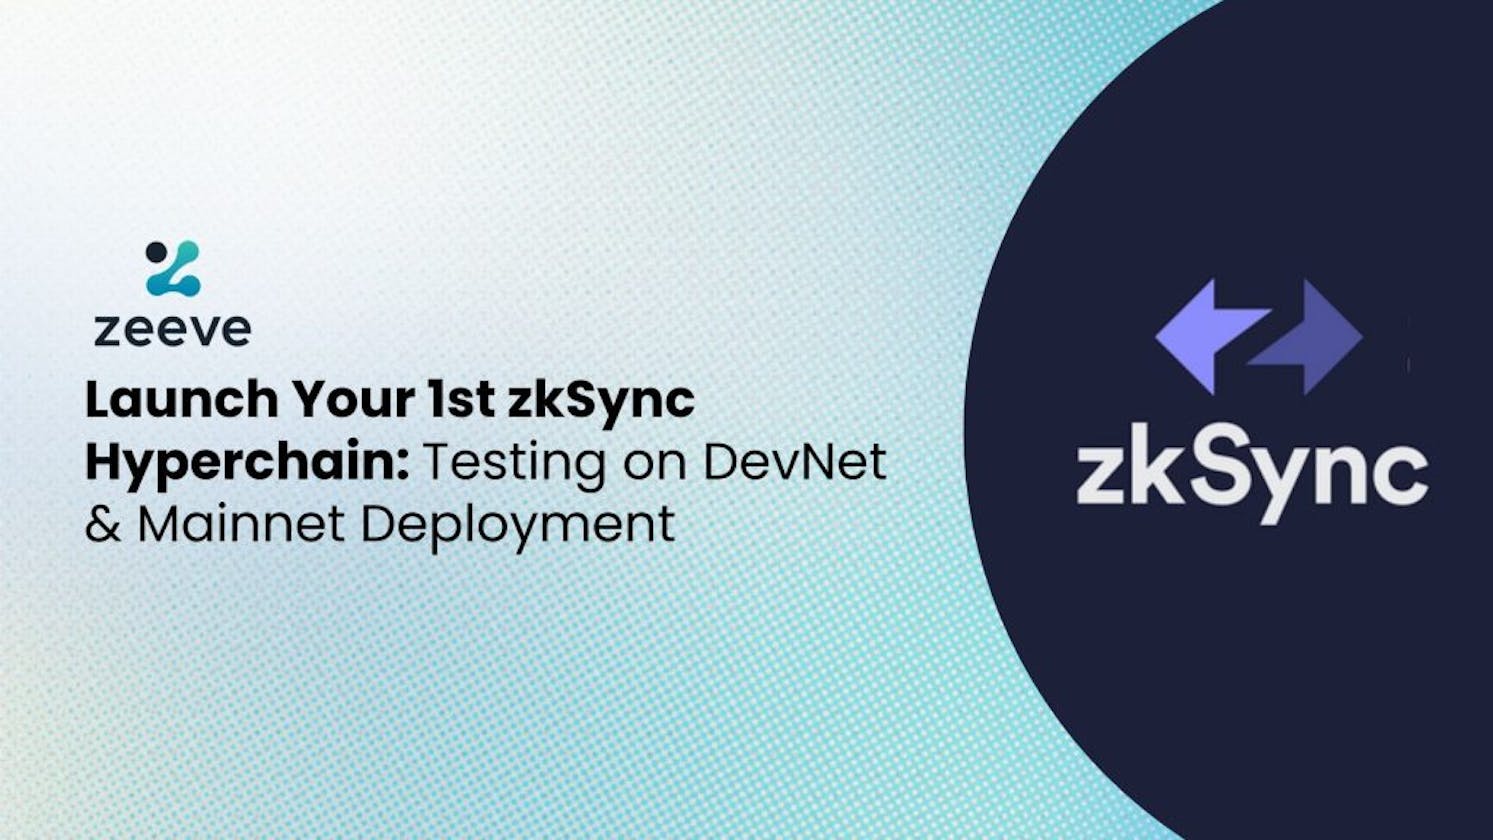 Launch your first zkSync Hyperchain: Test Rigorously & Deploy to Publicnet